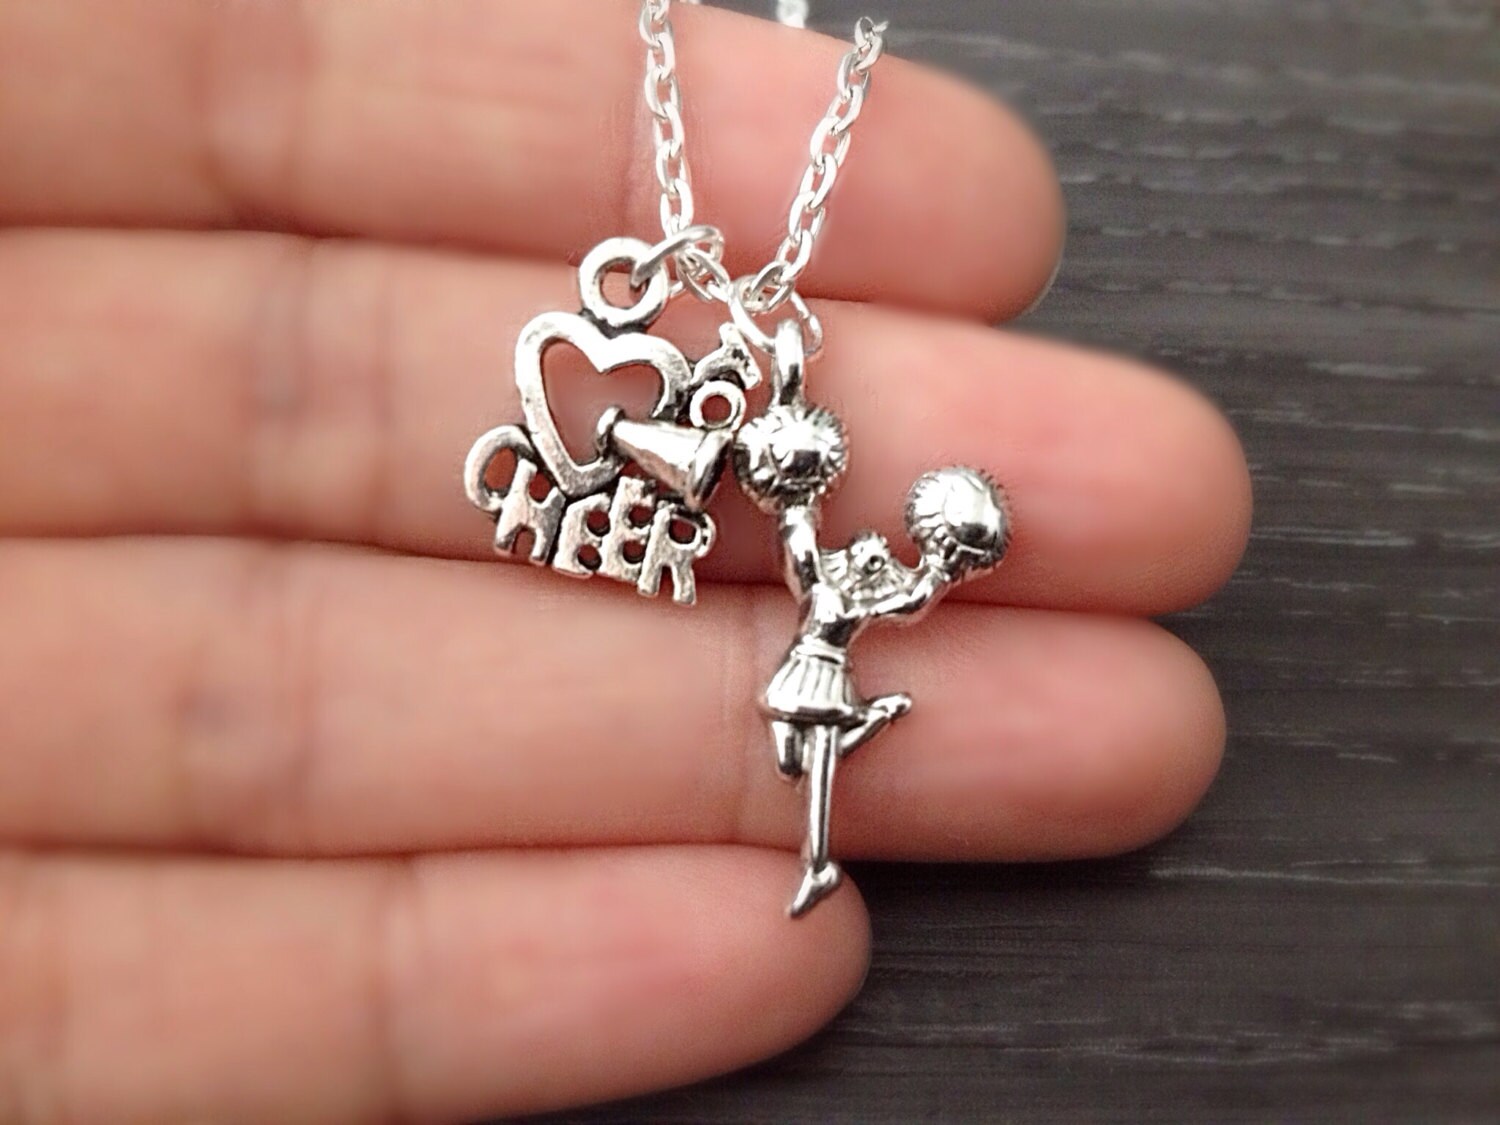 Sterling Cheer Mom Charm, Cheerleading Jewelry, Cheer Charms, Megaphone Charm,Cheer Jewelry, Cheer Mom Necklace, Sterling Cheer Charms